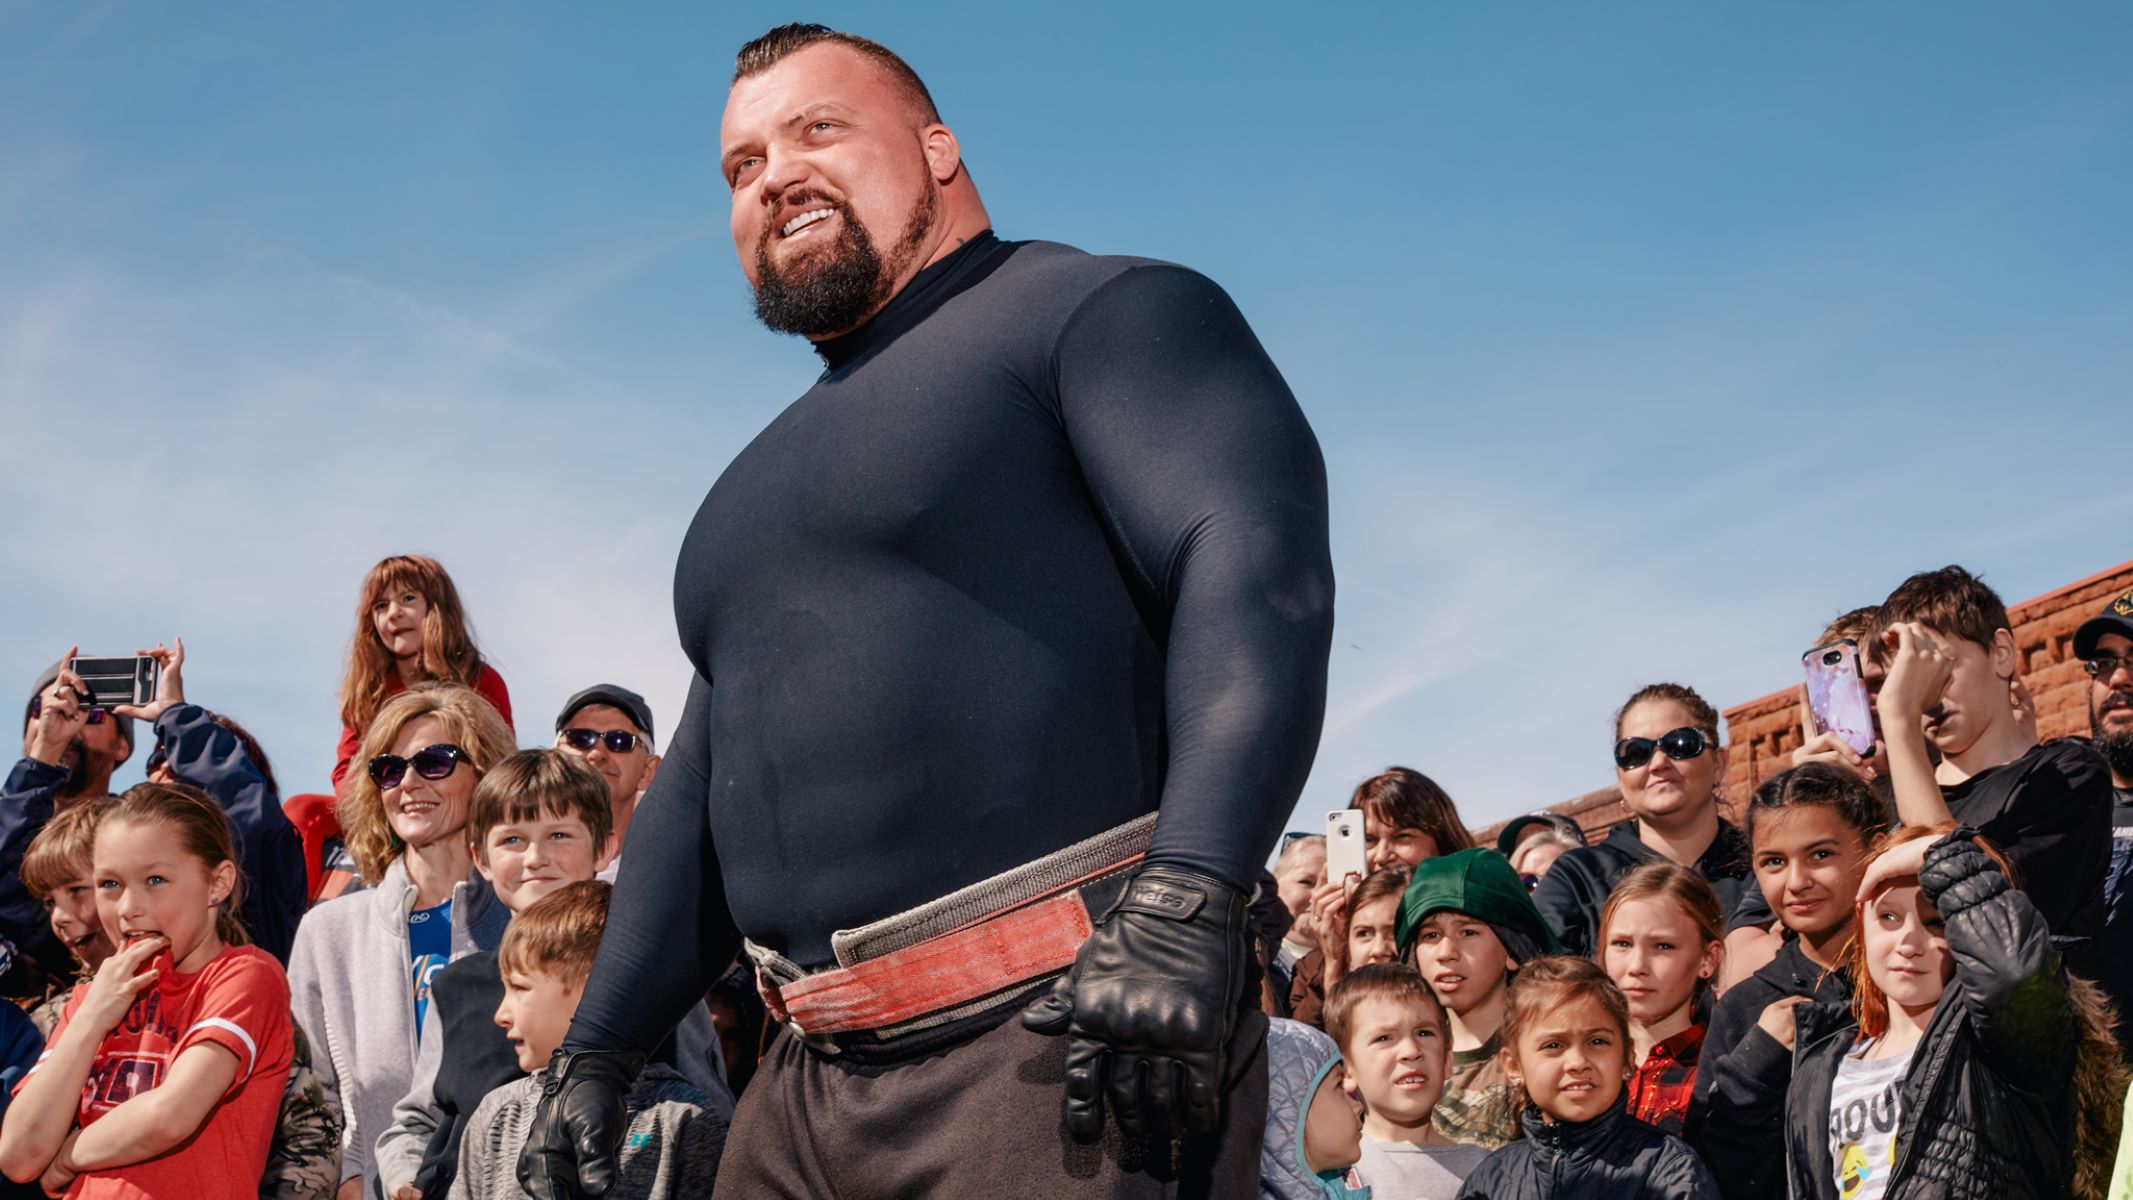 Eddie Hall's Shocking Secret Revealed: The Truth About Steroids